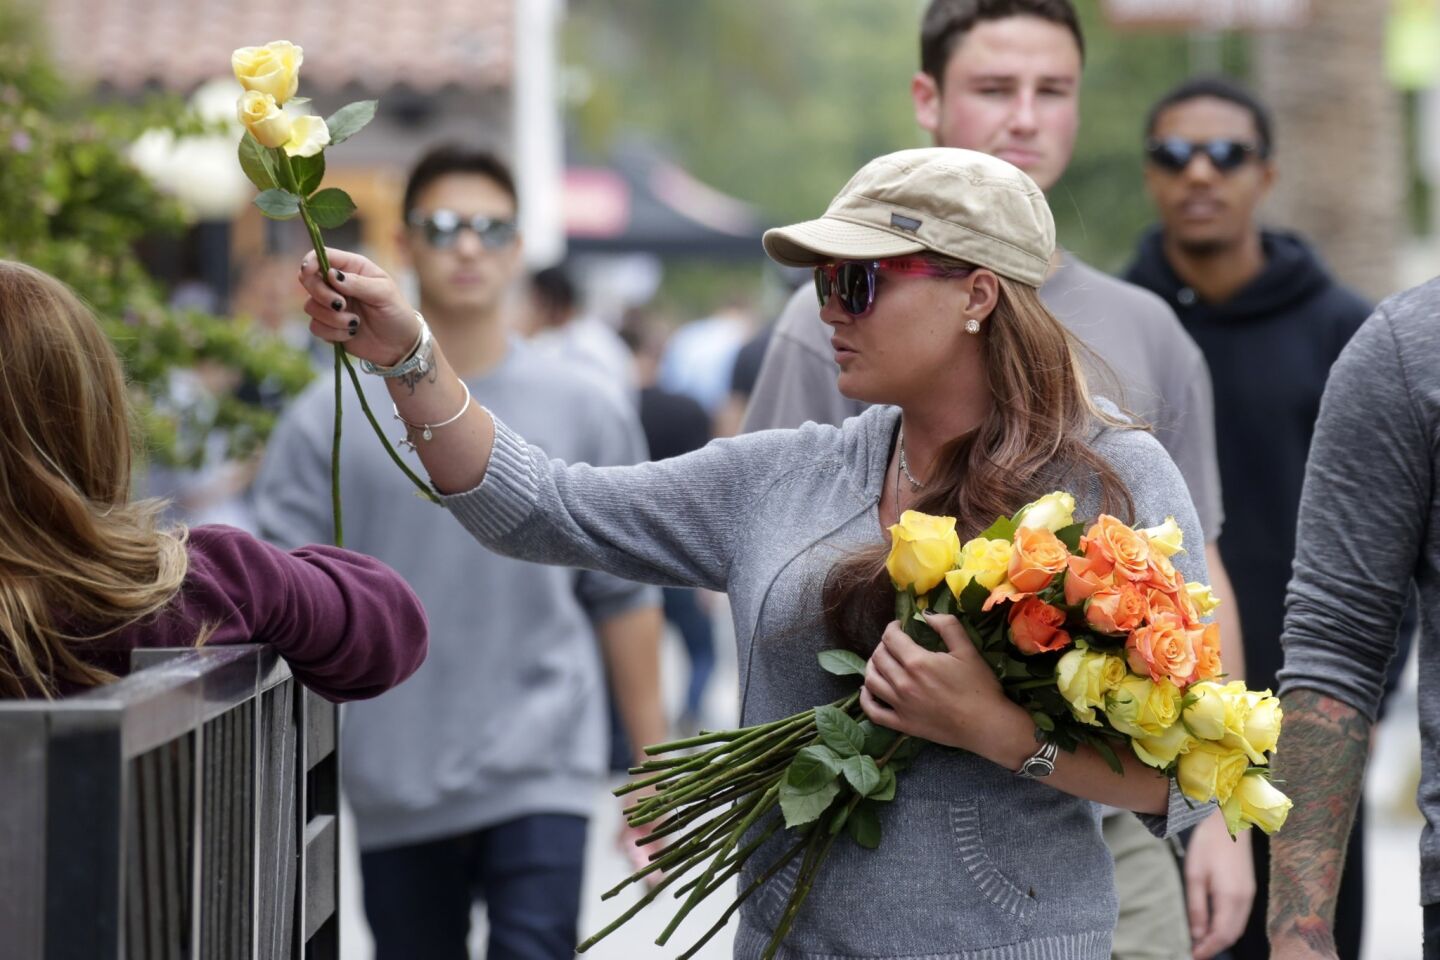 Caitlyn Dixon distributes roses in Isla Vista on May 24, the day after a shooting rampage left six people and the gunman dead.